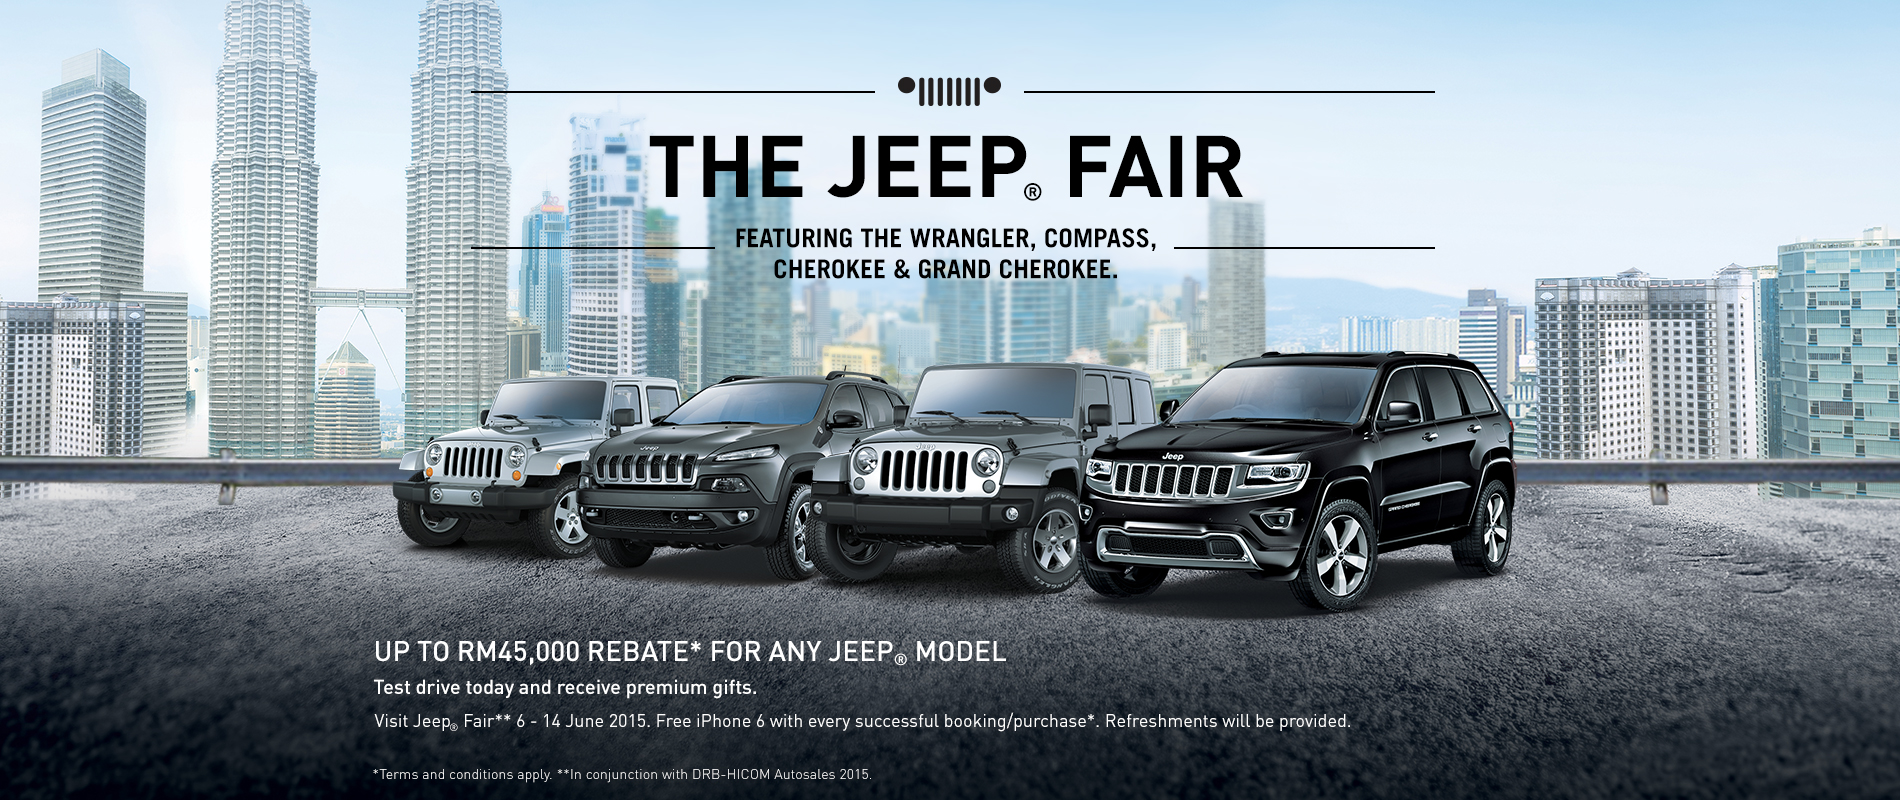 AD Get Up To RM45 000 Rebate At The Jeep Fair 2015 The Jeep Fair 